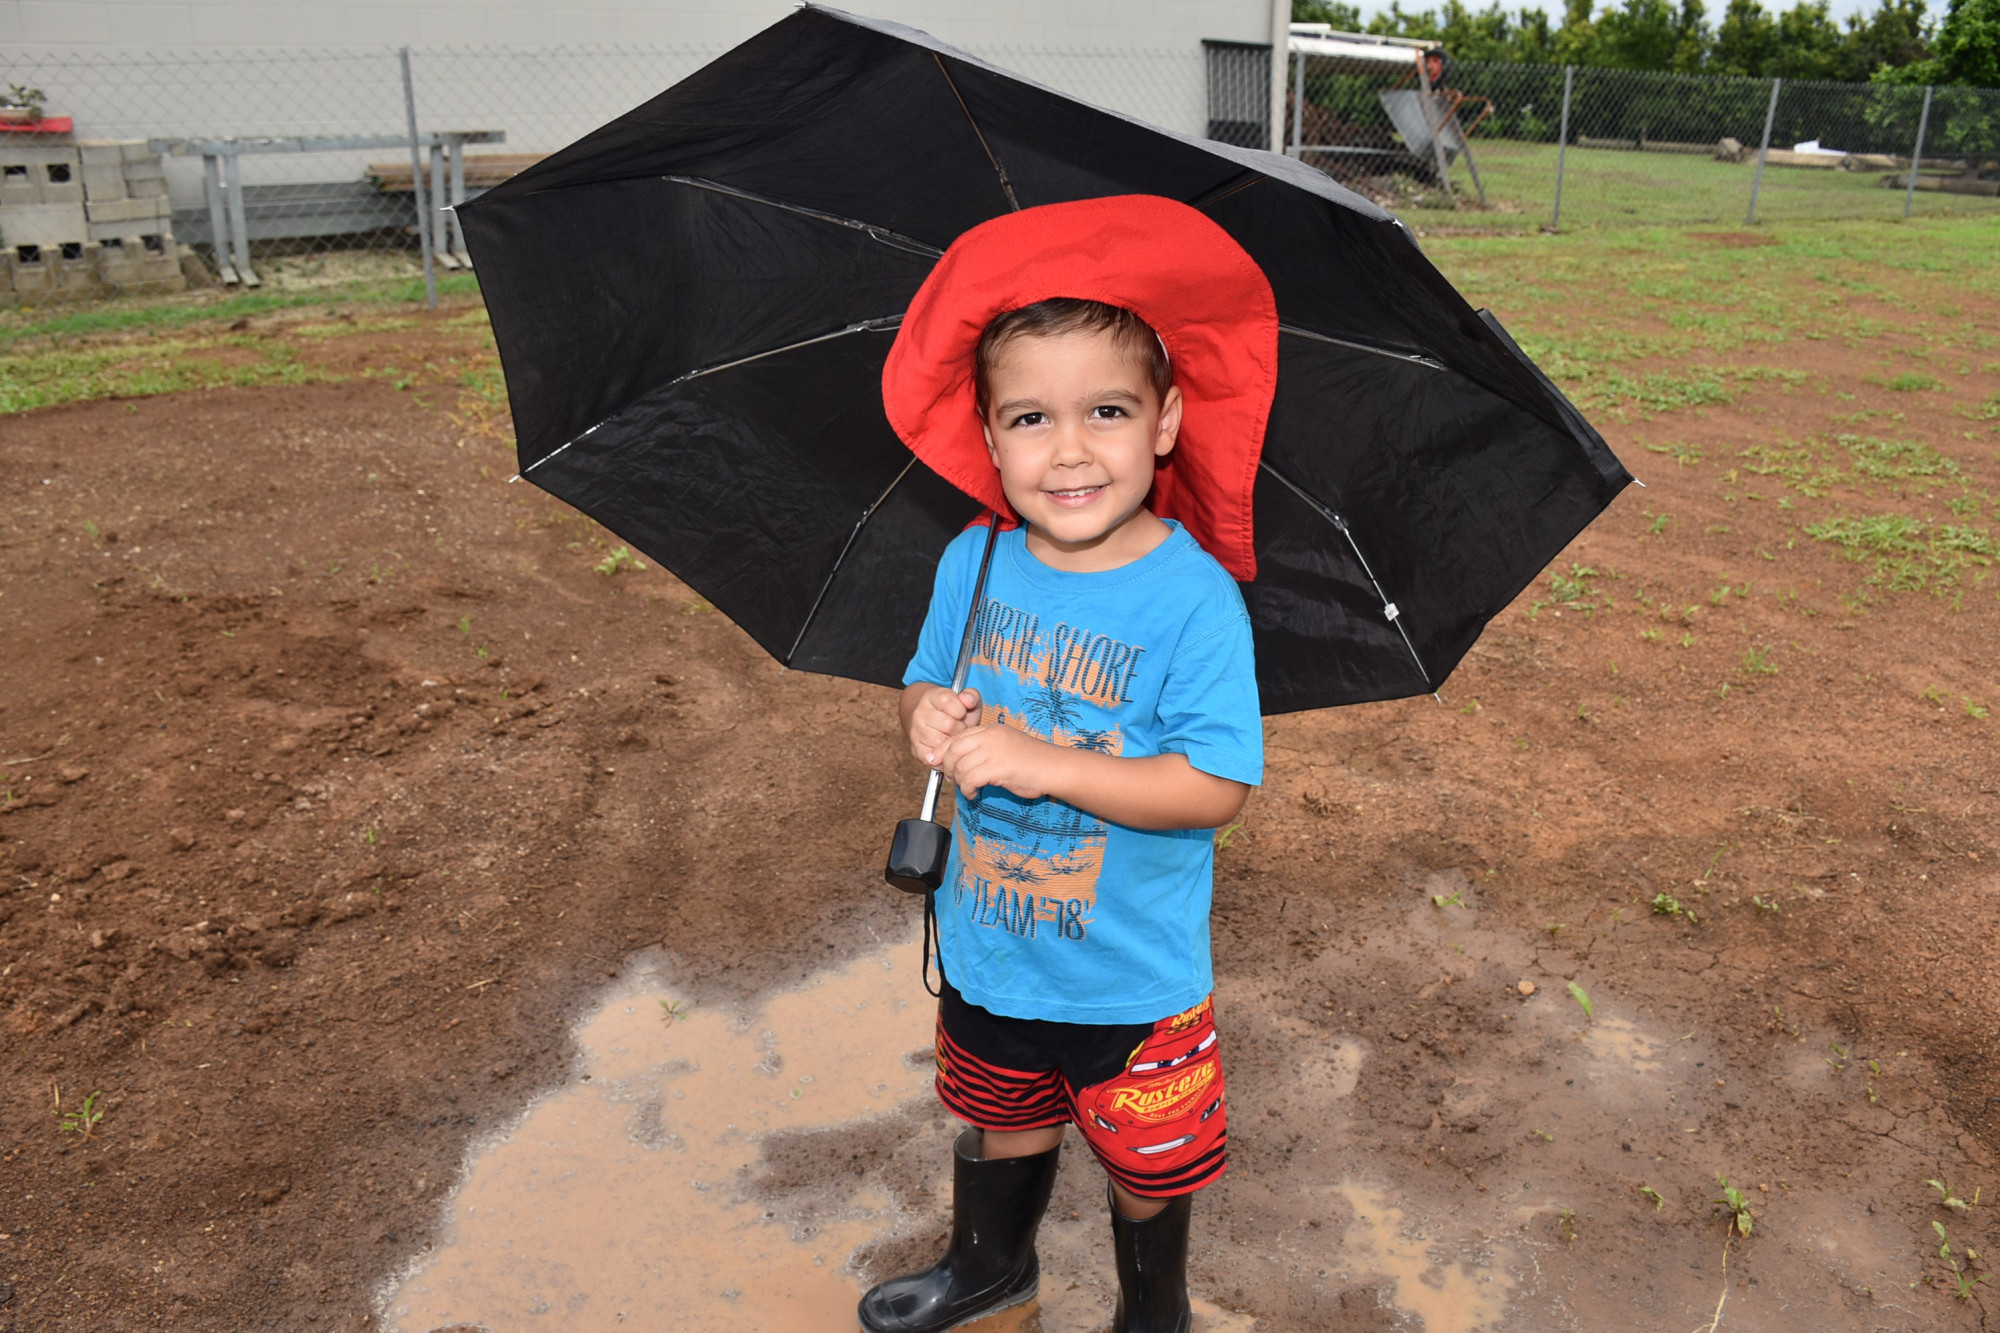 Three year-old Braxton Malfitana who got to jump in puddles thanks to wet the start of 2021.